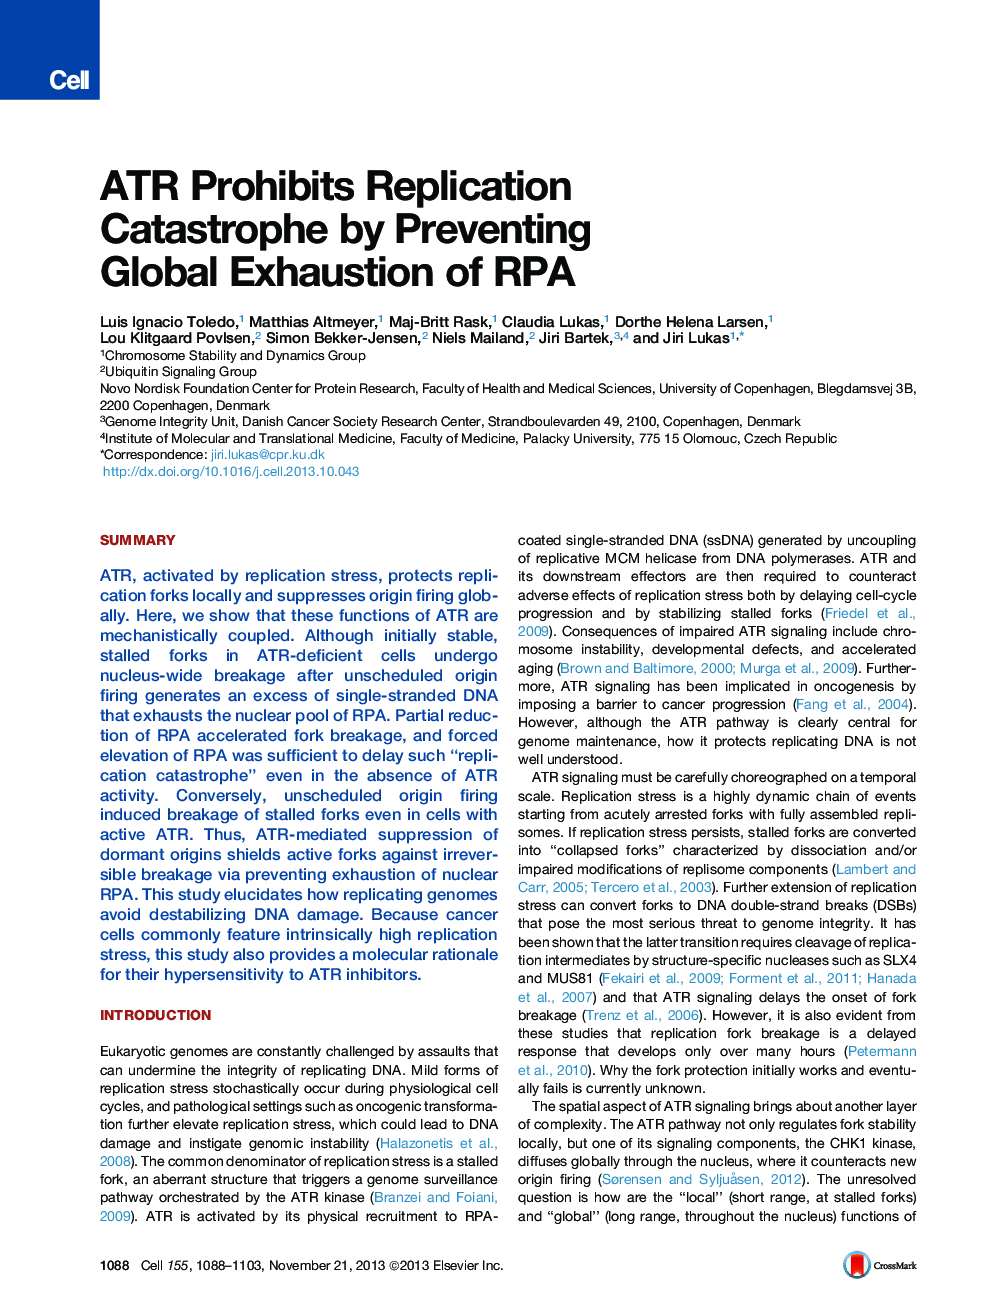 ATR Prohibits Replication Catastrophe by Preventing Global Exhaustion of RPA